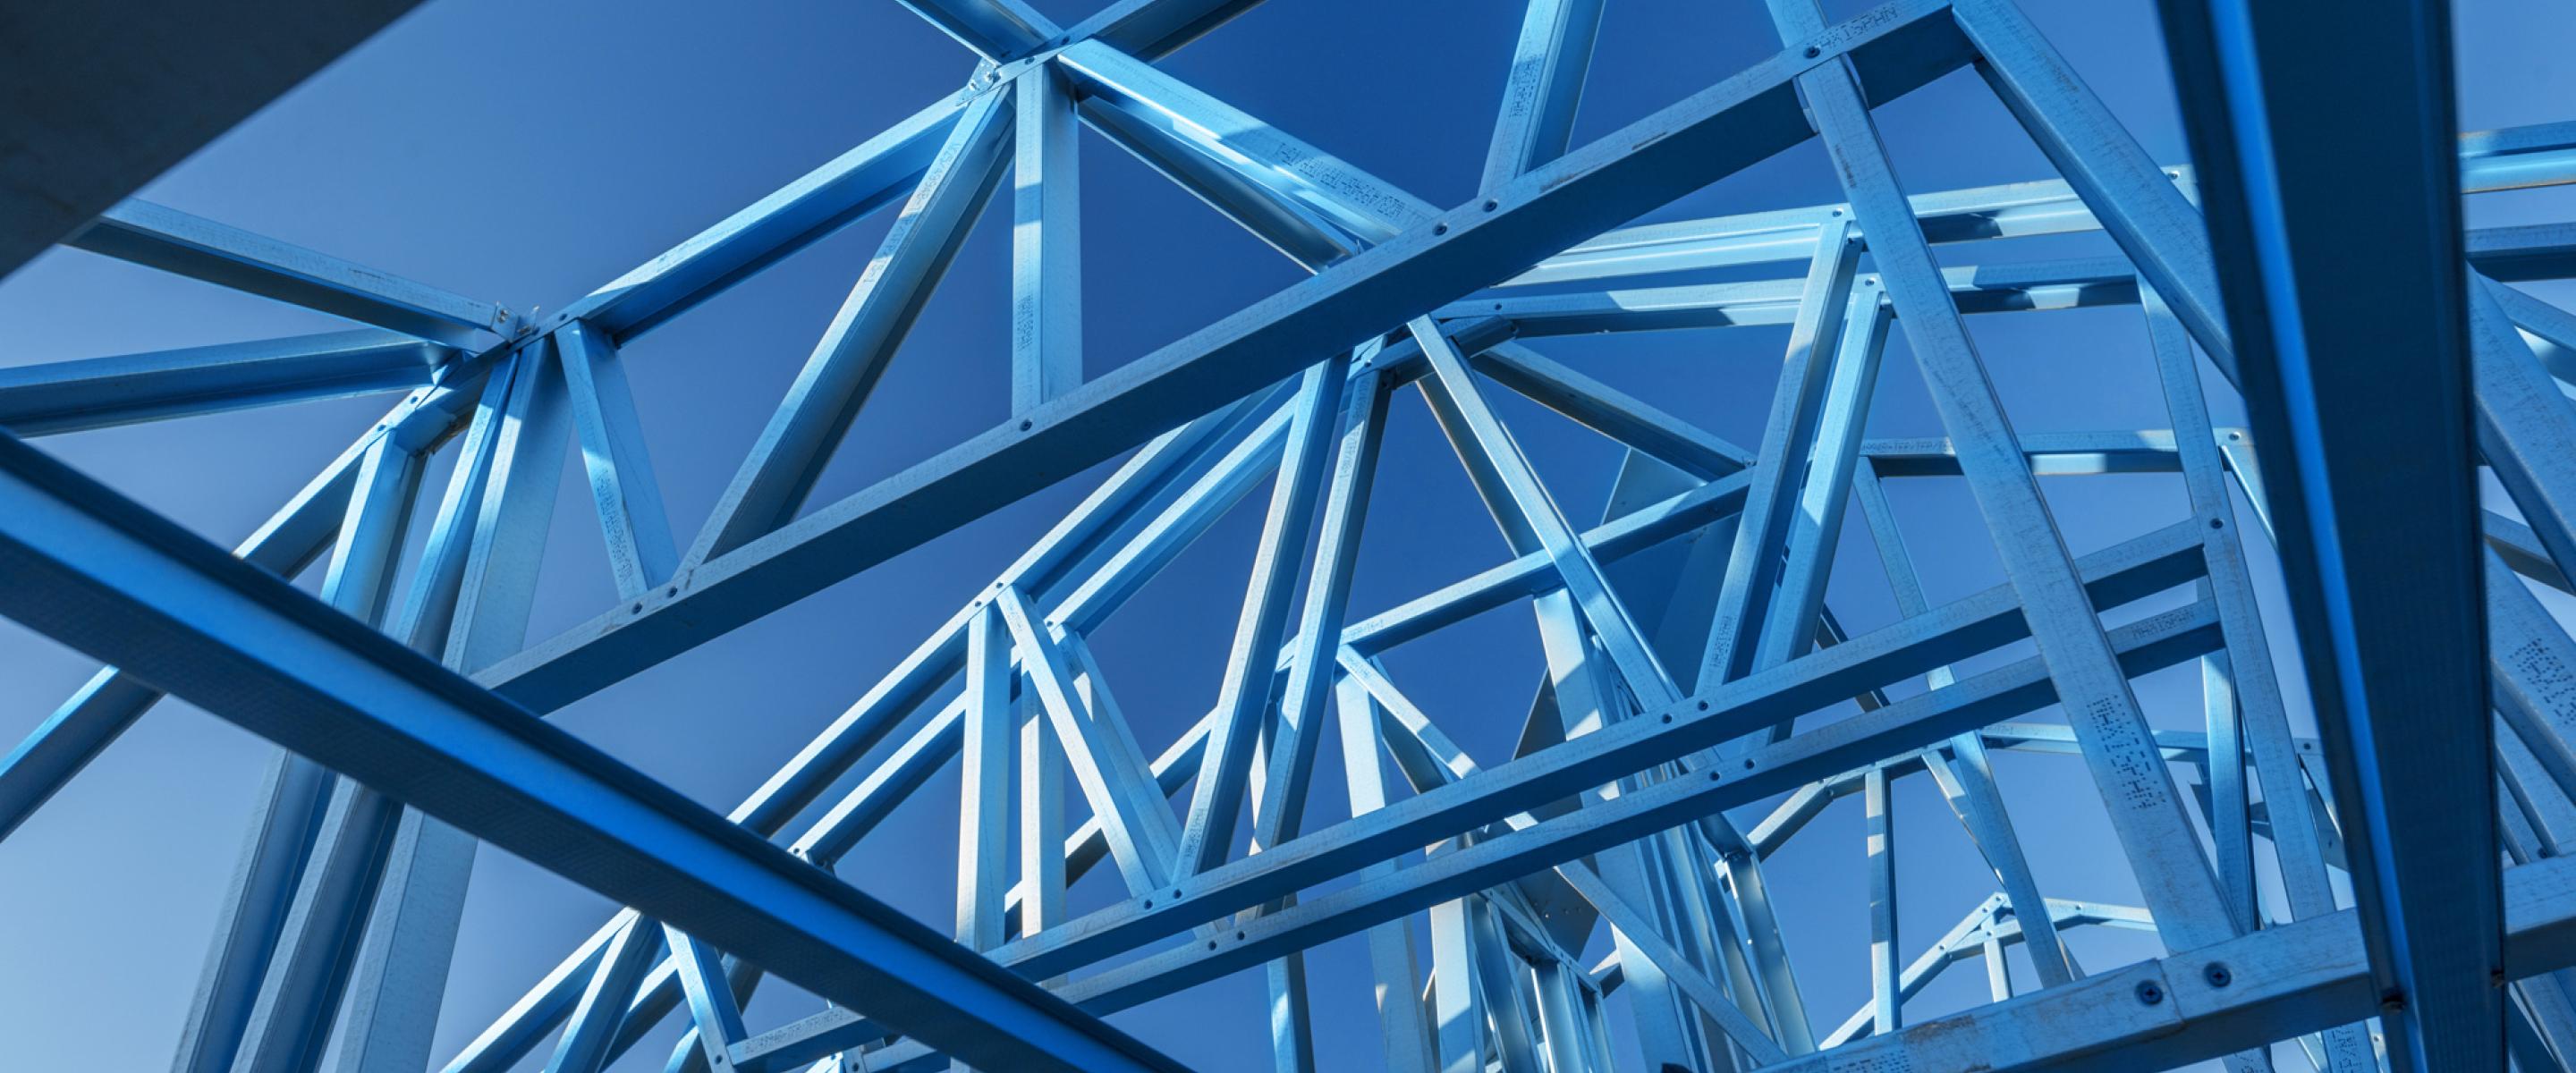 Maxispan steel building frames product range includes wall frames, roof trusses, floor joists and most recently, flooring cassettes, all made from TRUECORE® steel